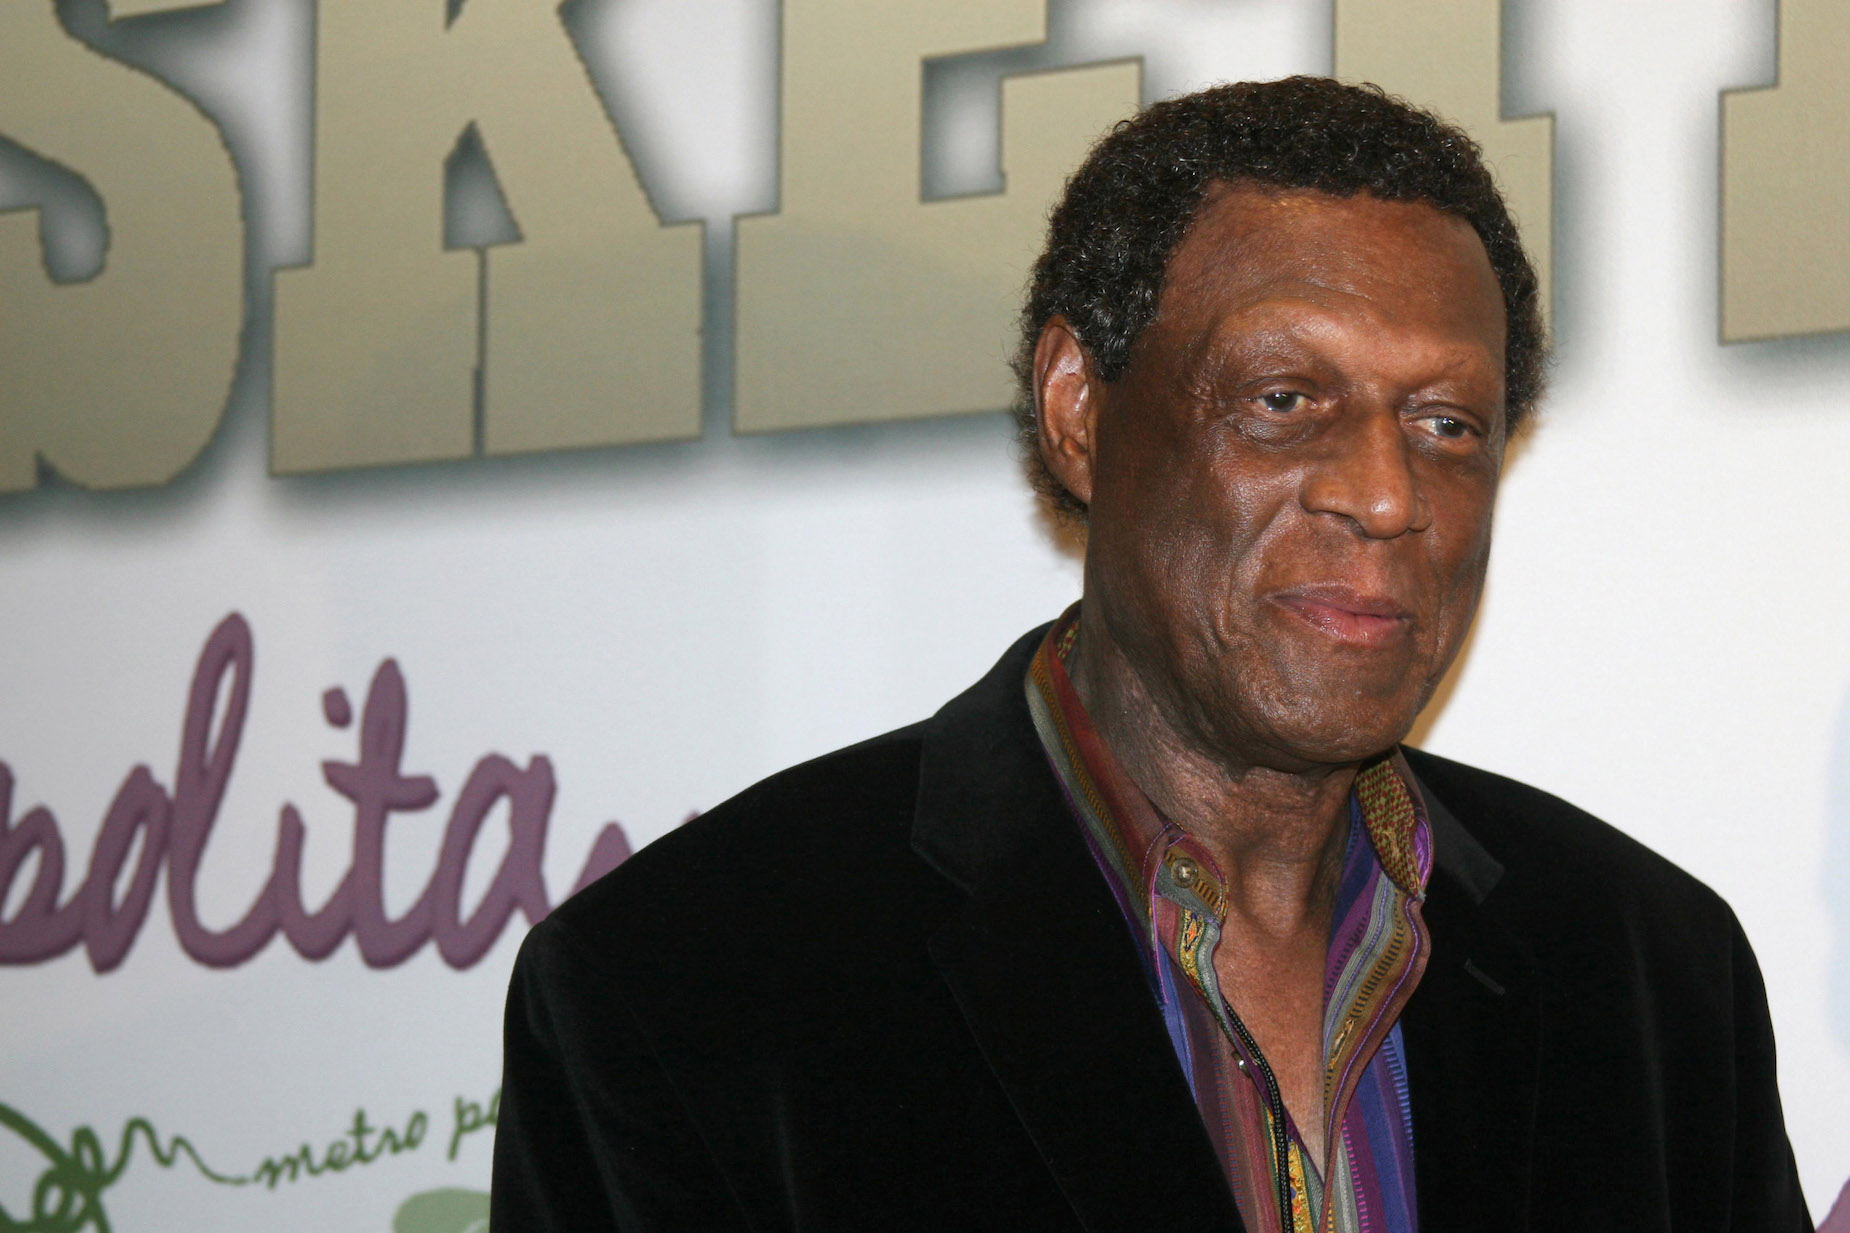 Elgin Baylor was the first player to ever boycott an NBA game in 1959.